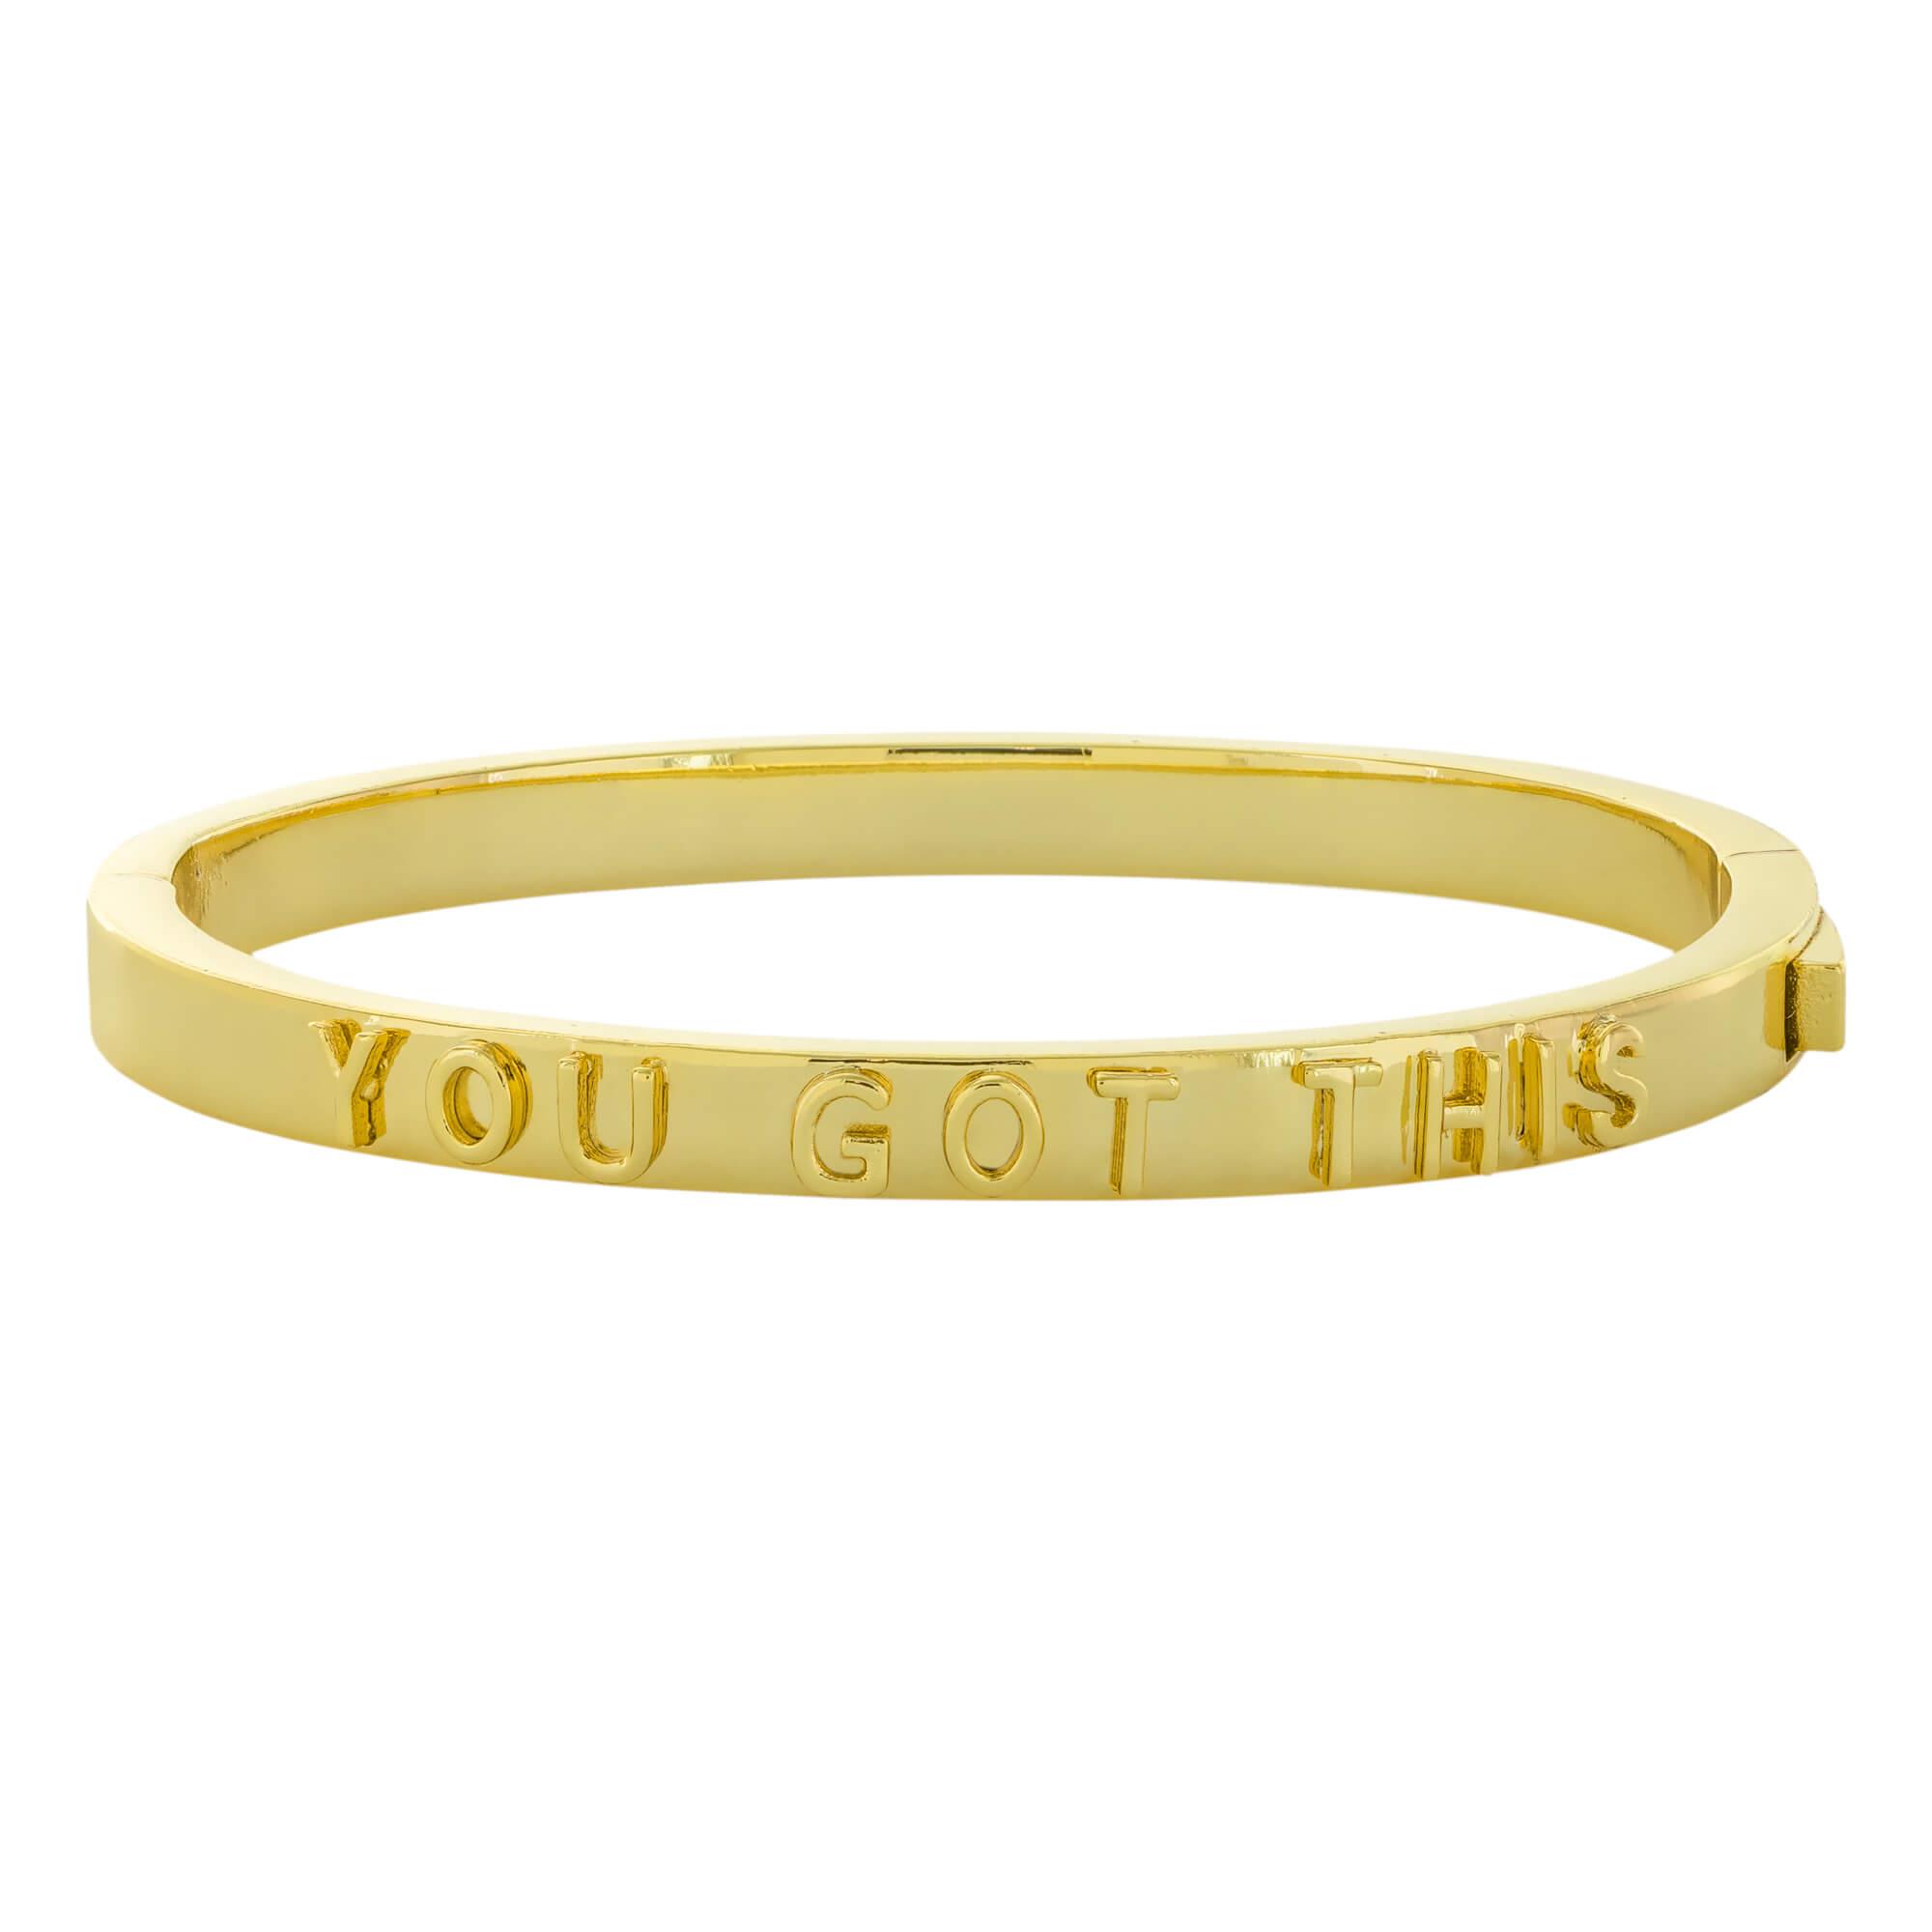 YOU GOT THIS GOLD DIPPED HINGE BRACELET